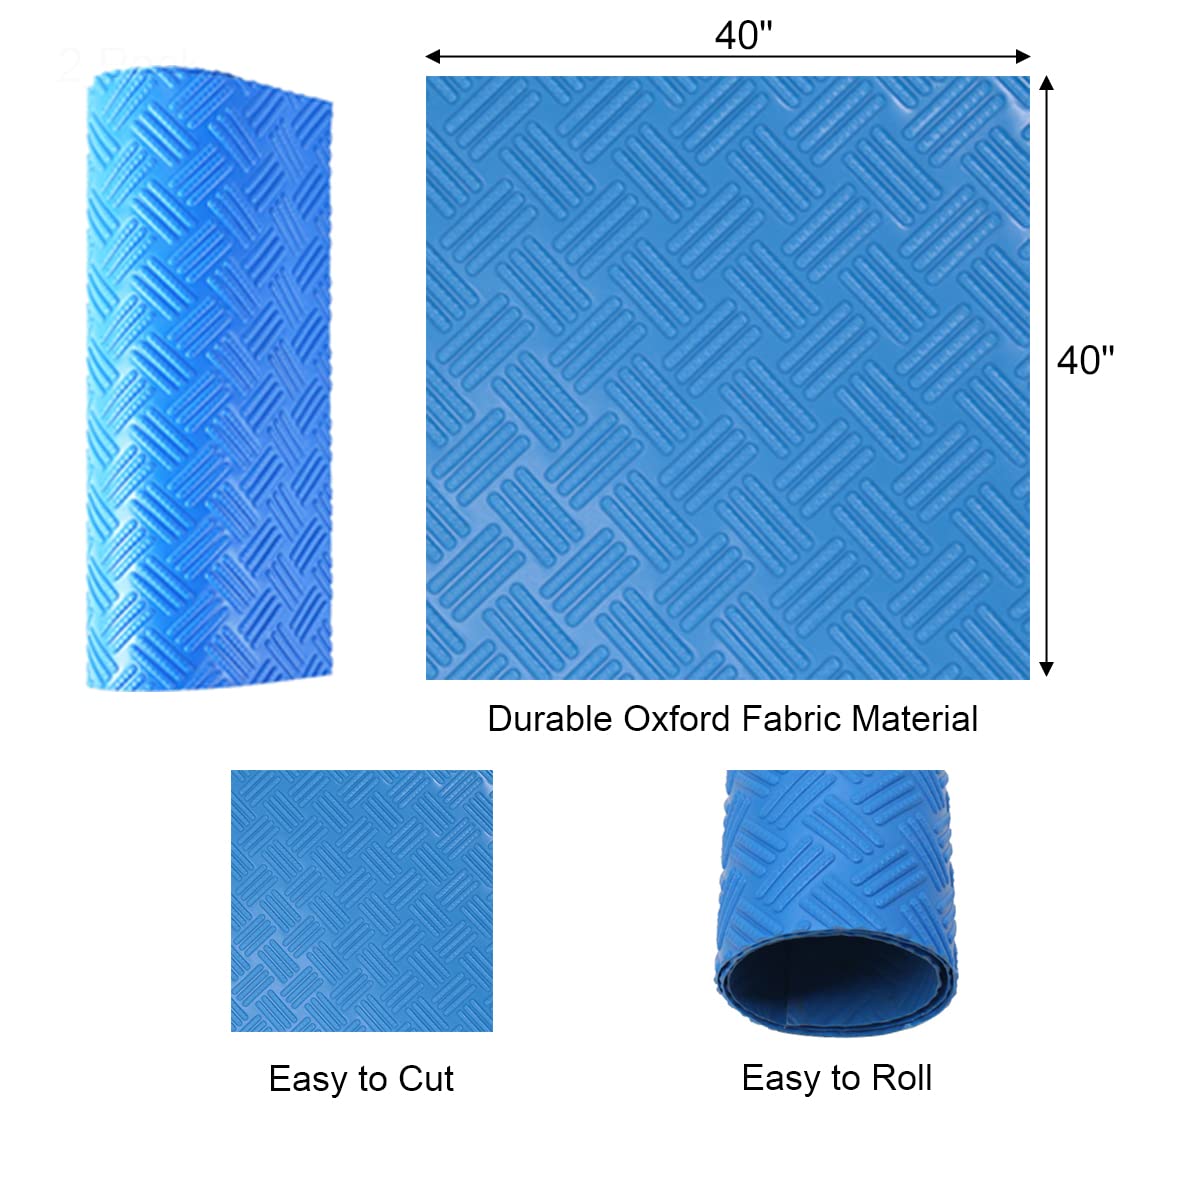 Swimming Pool Ladder Mat - 40"x40" Pool Ladder Mat for Above Ground Inground Inflatable Pools - Pool Ladder Pad - Pool Step Mat - Pool Liner Protection Cushion for Stairs Blue